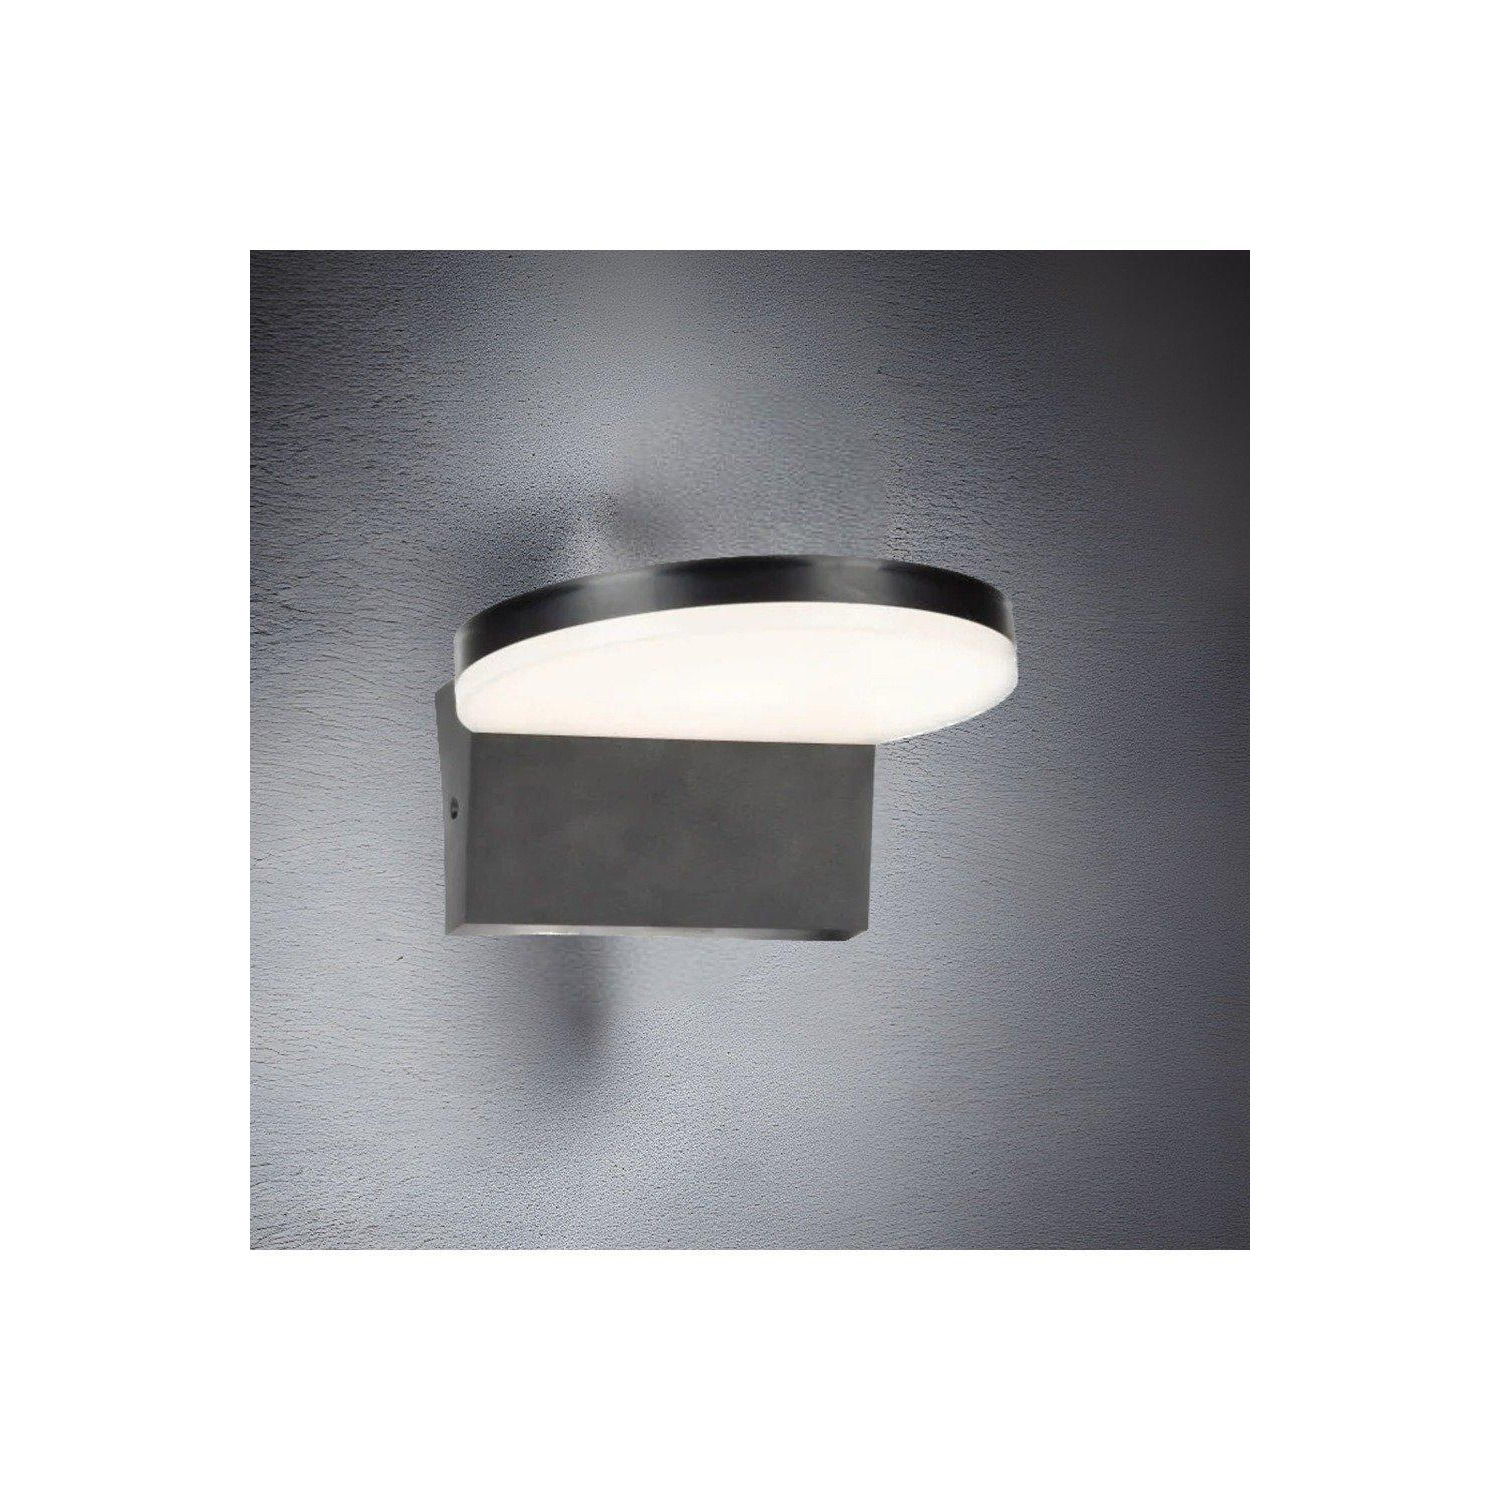 'Aubrey' Black Curved LED Outdoor Wall Light 4000k Natural White Integrated LED IP65 - image 1